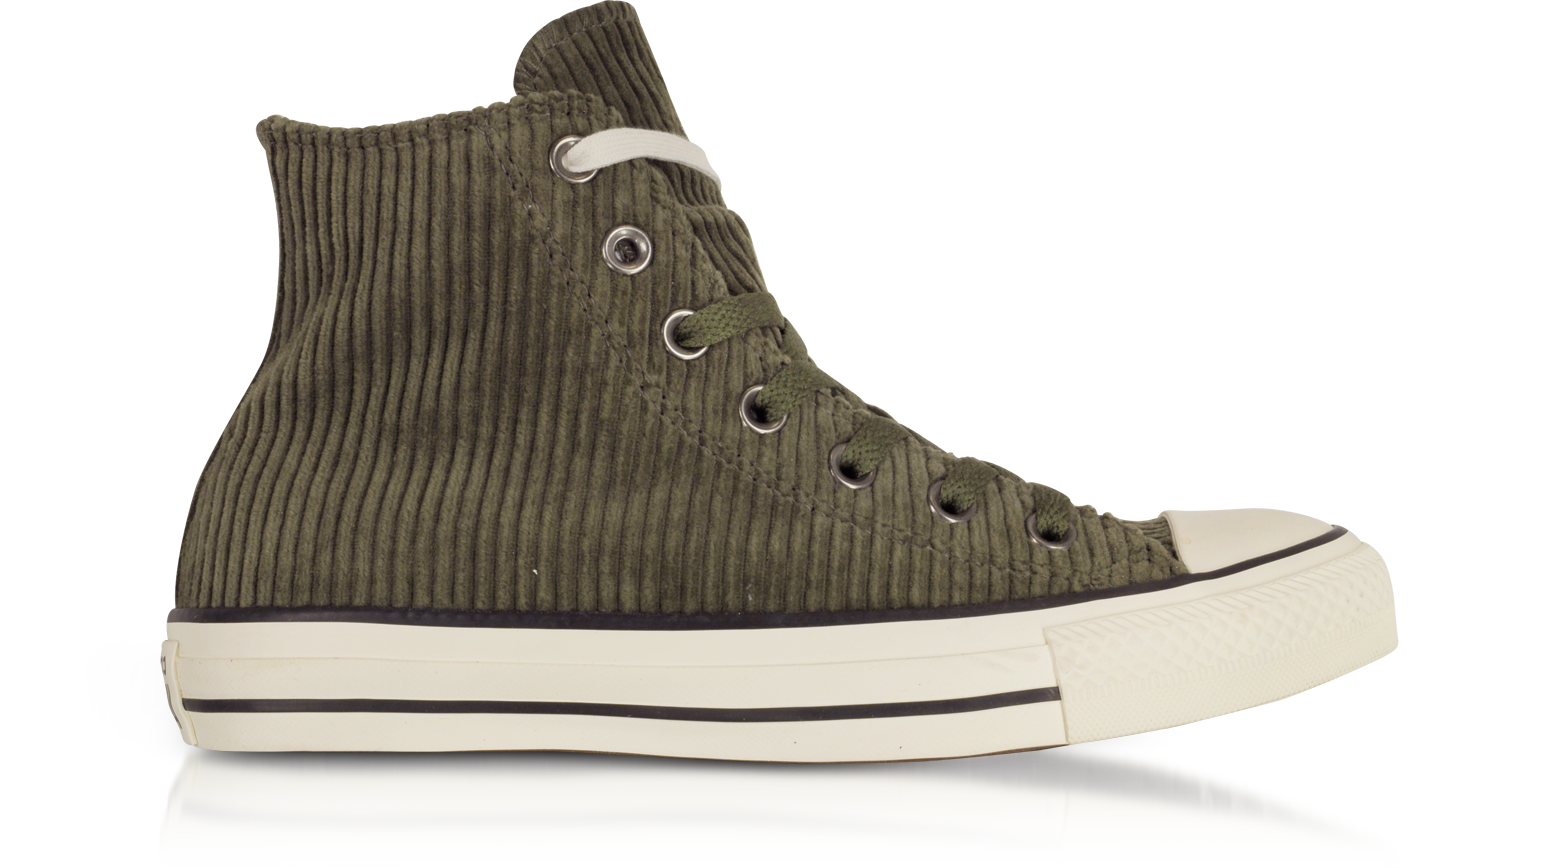 Converse Limited Edition Chuck Taylor All Star Hi Military Green Corduroy  High Top Sneakers 11 (13 WOMENS US | 11 UK | 45 EU) at FORZIERI